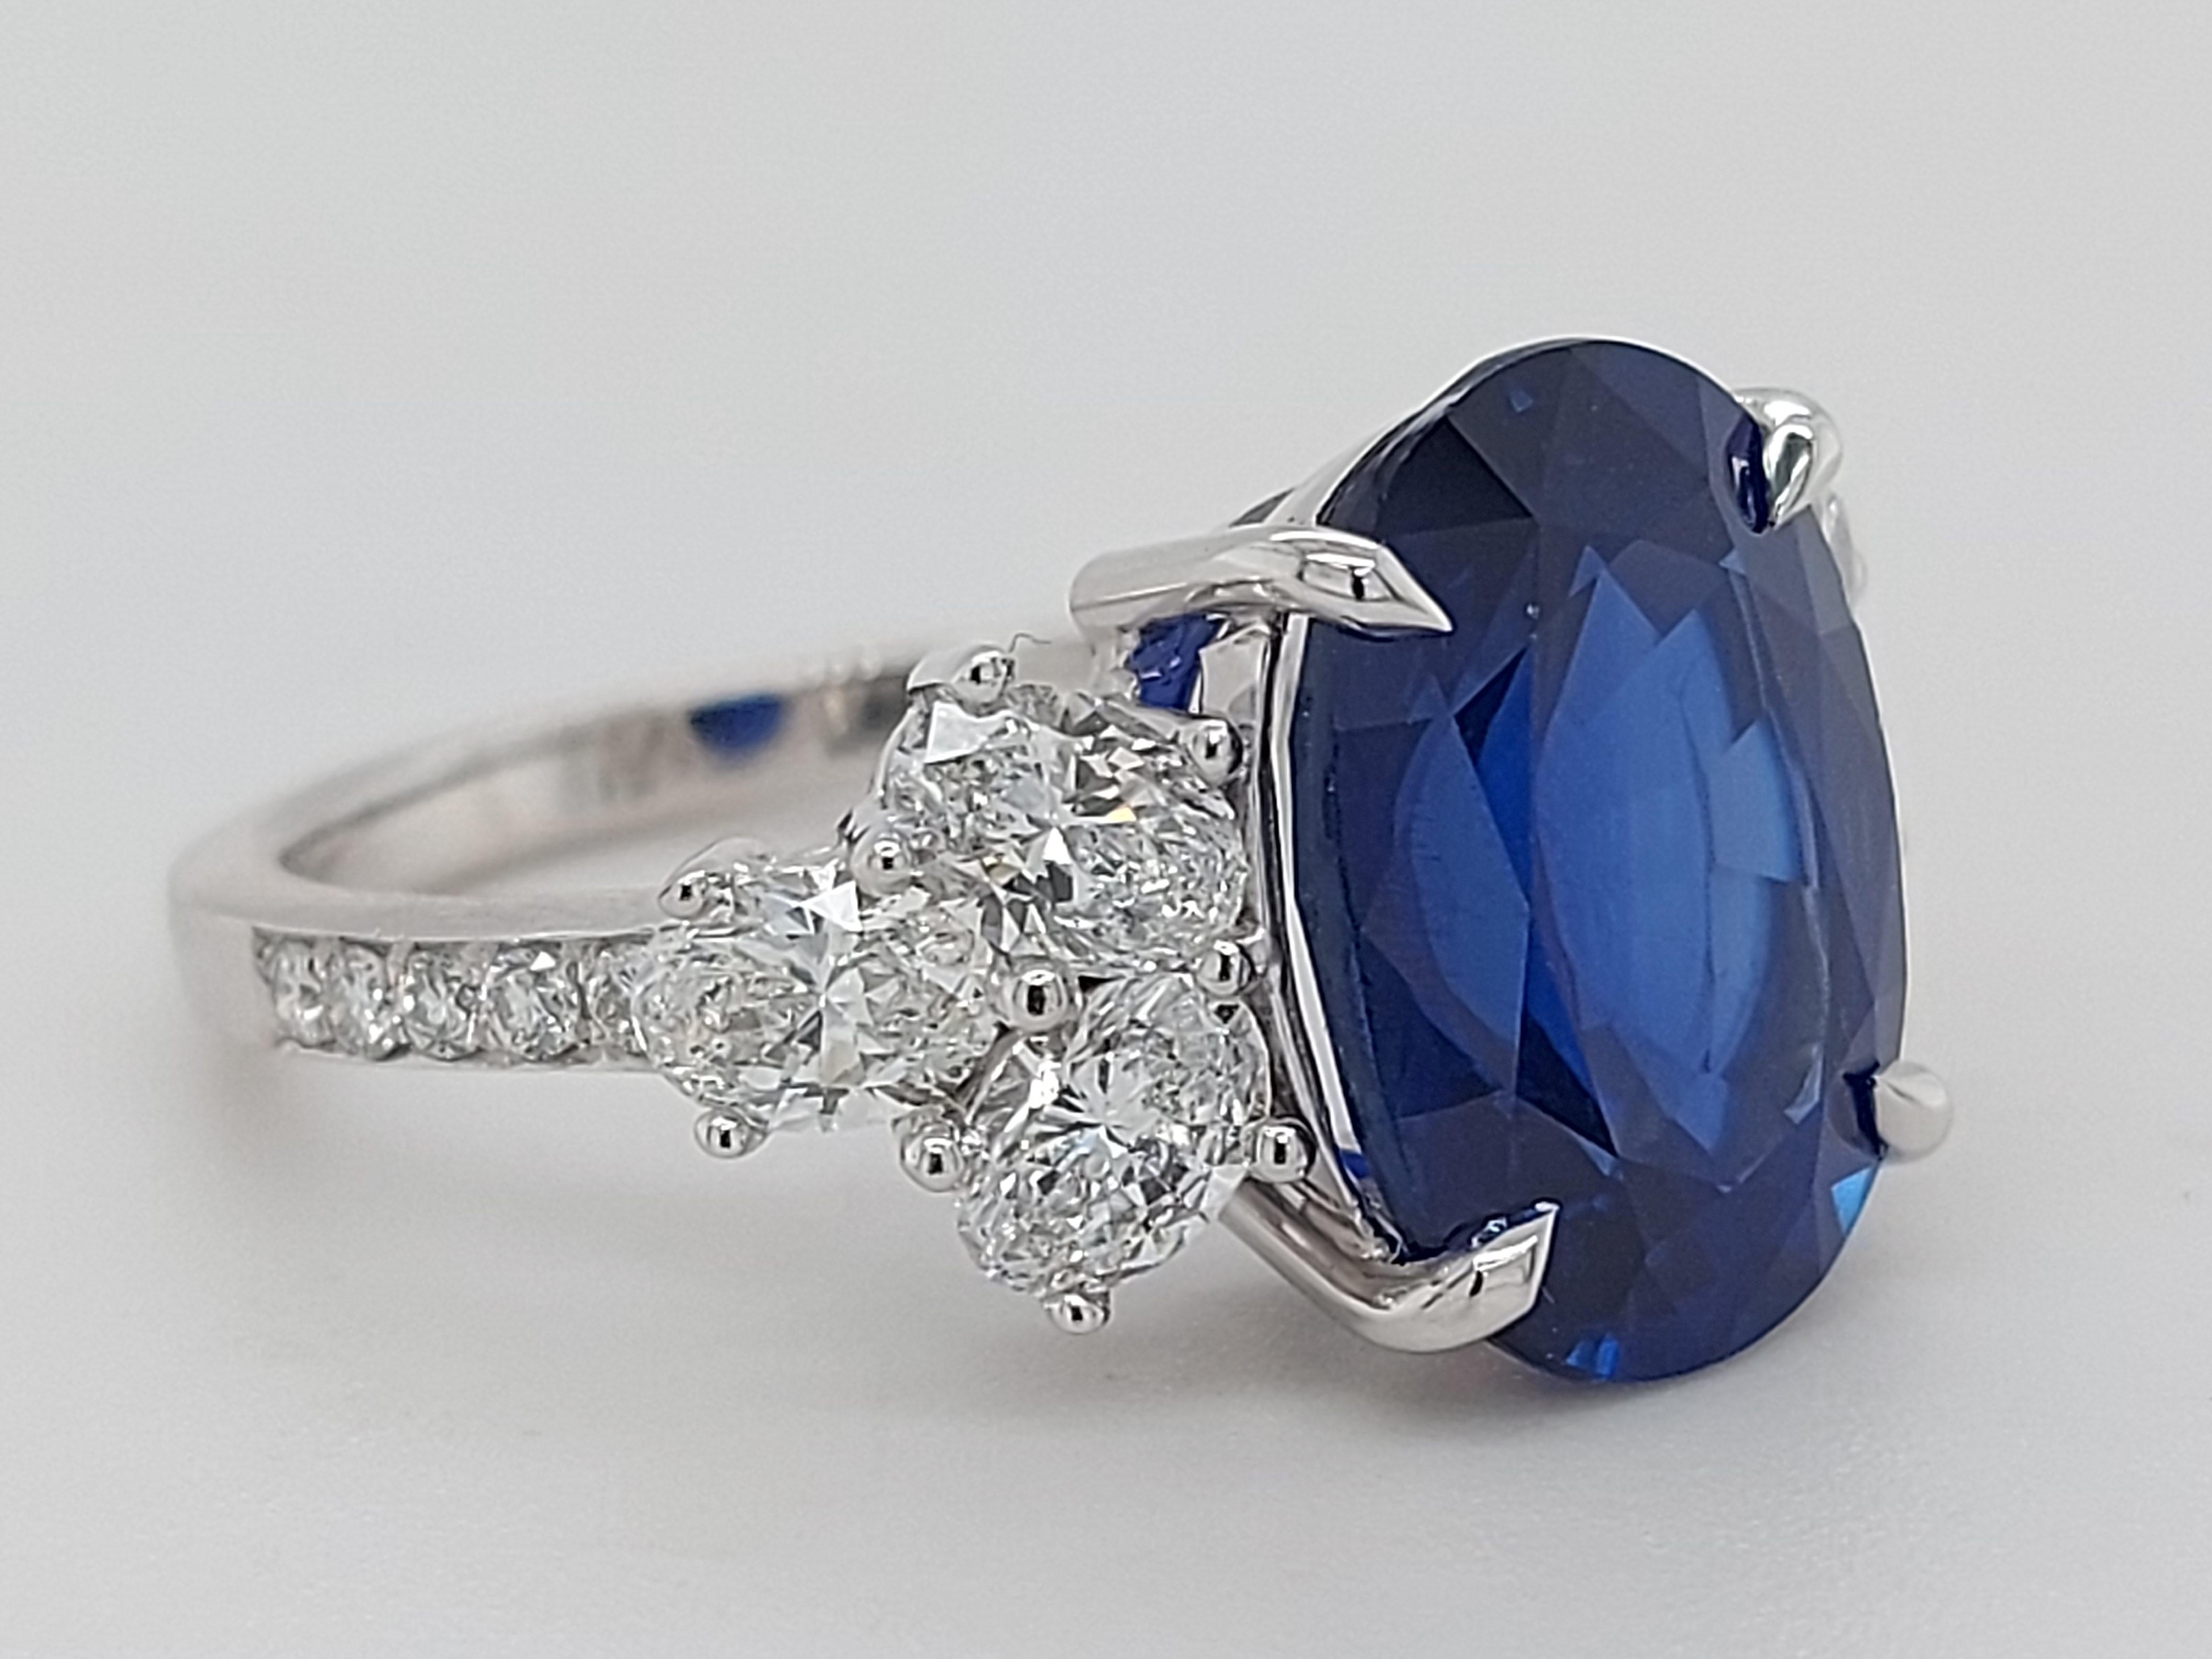 Women's or Men's 18 Karat White Gold Ring Set with a 7 Carat Sapphire and Diamonds